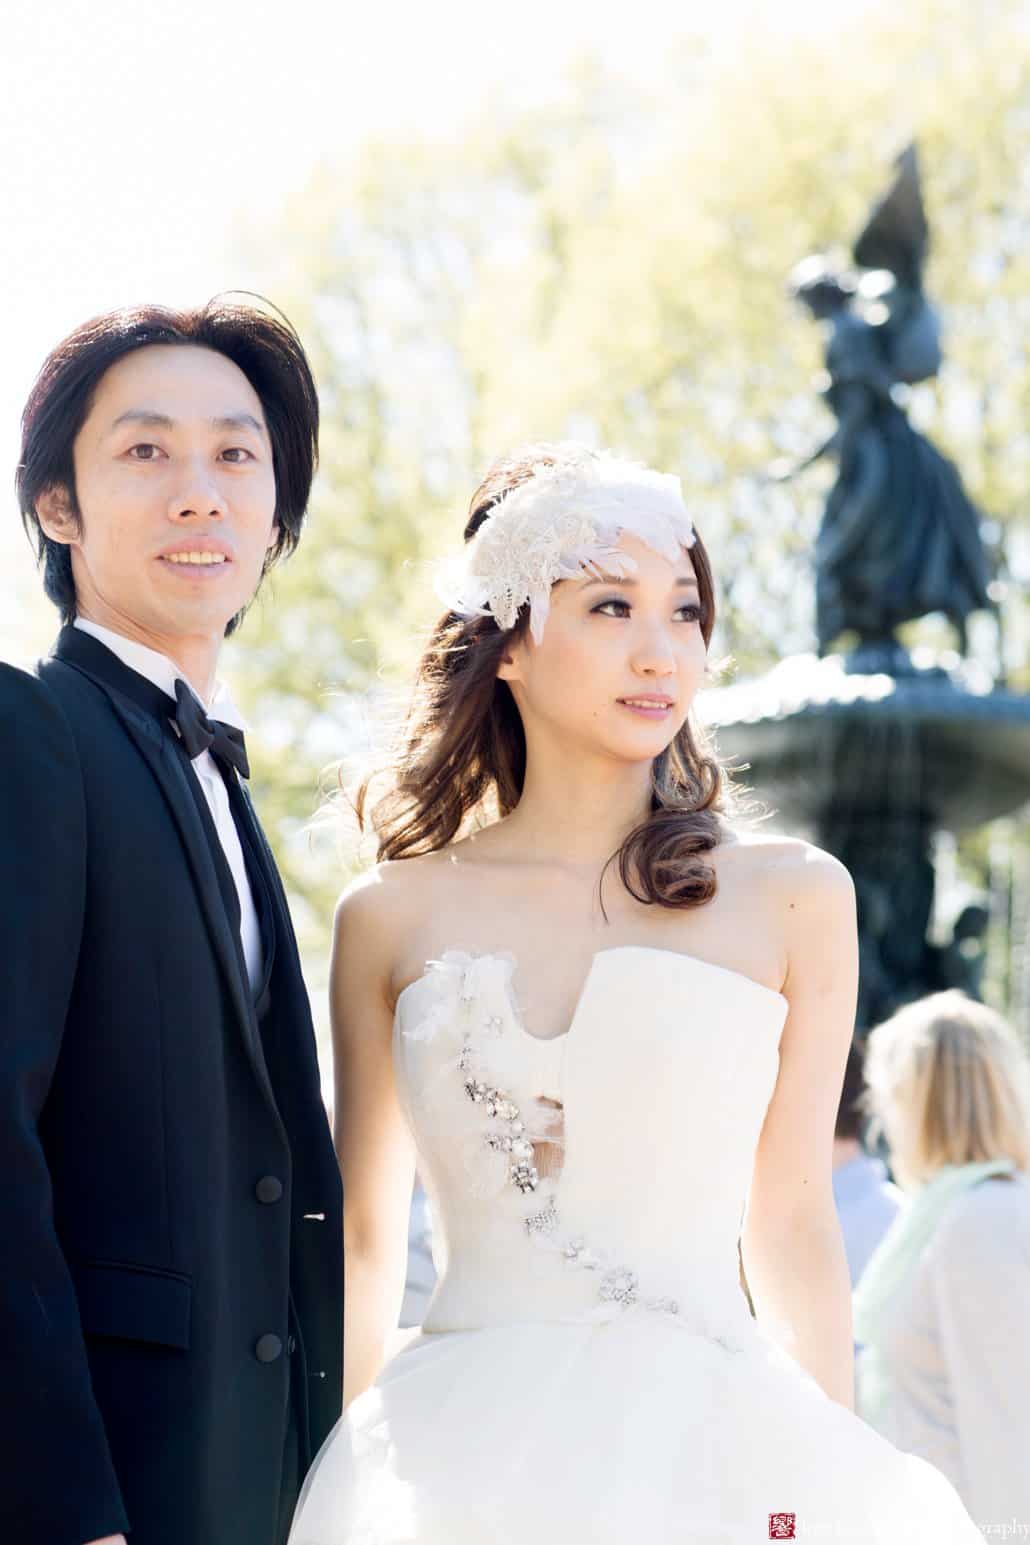 Documentary Portrait of Japanese wedding couple in Central Park at Bethesda Fountain photographed by NYC wedding photographer Kyo Morishima